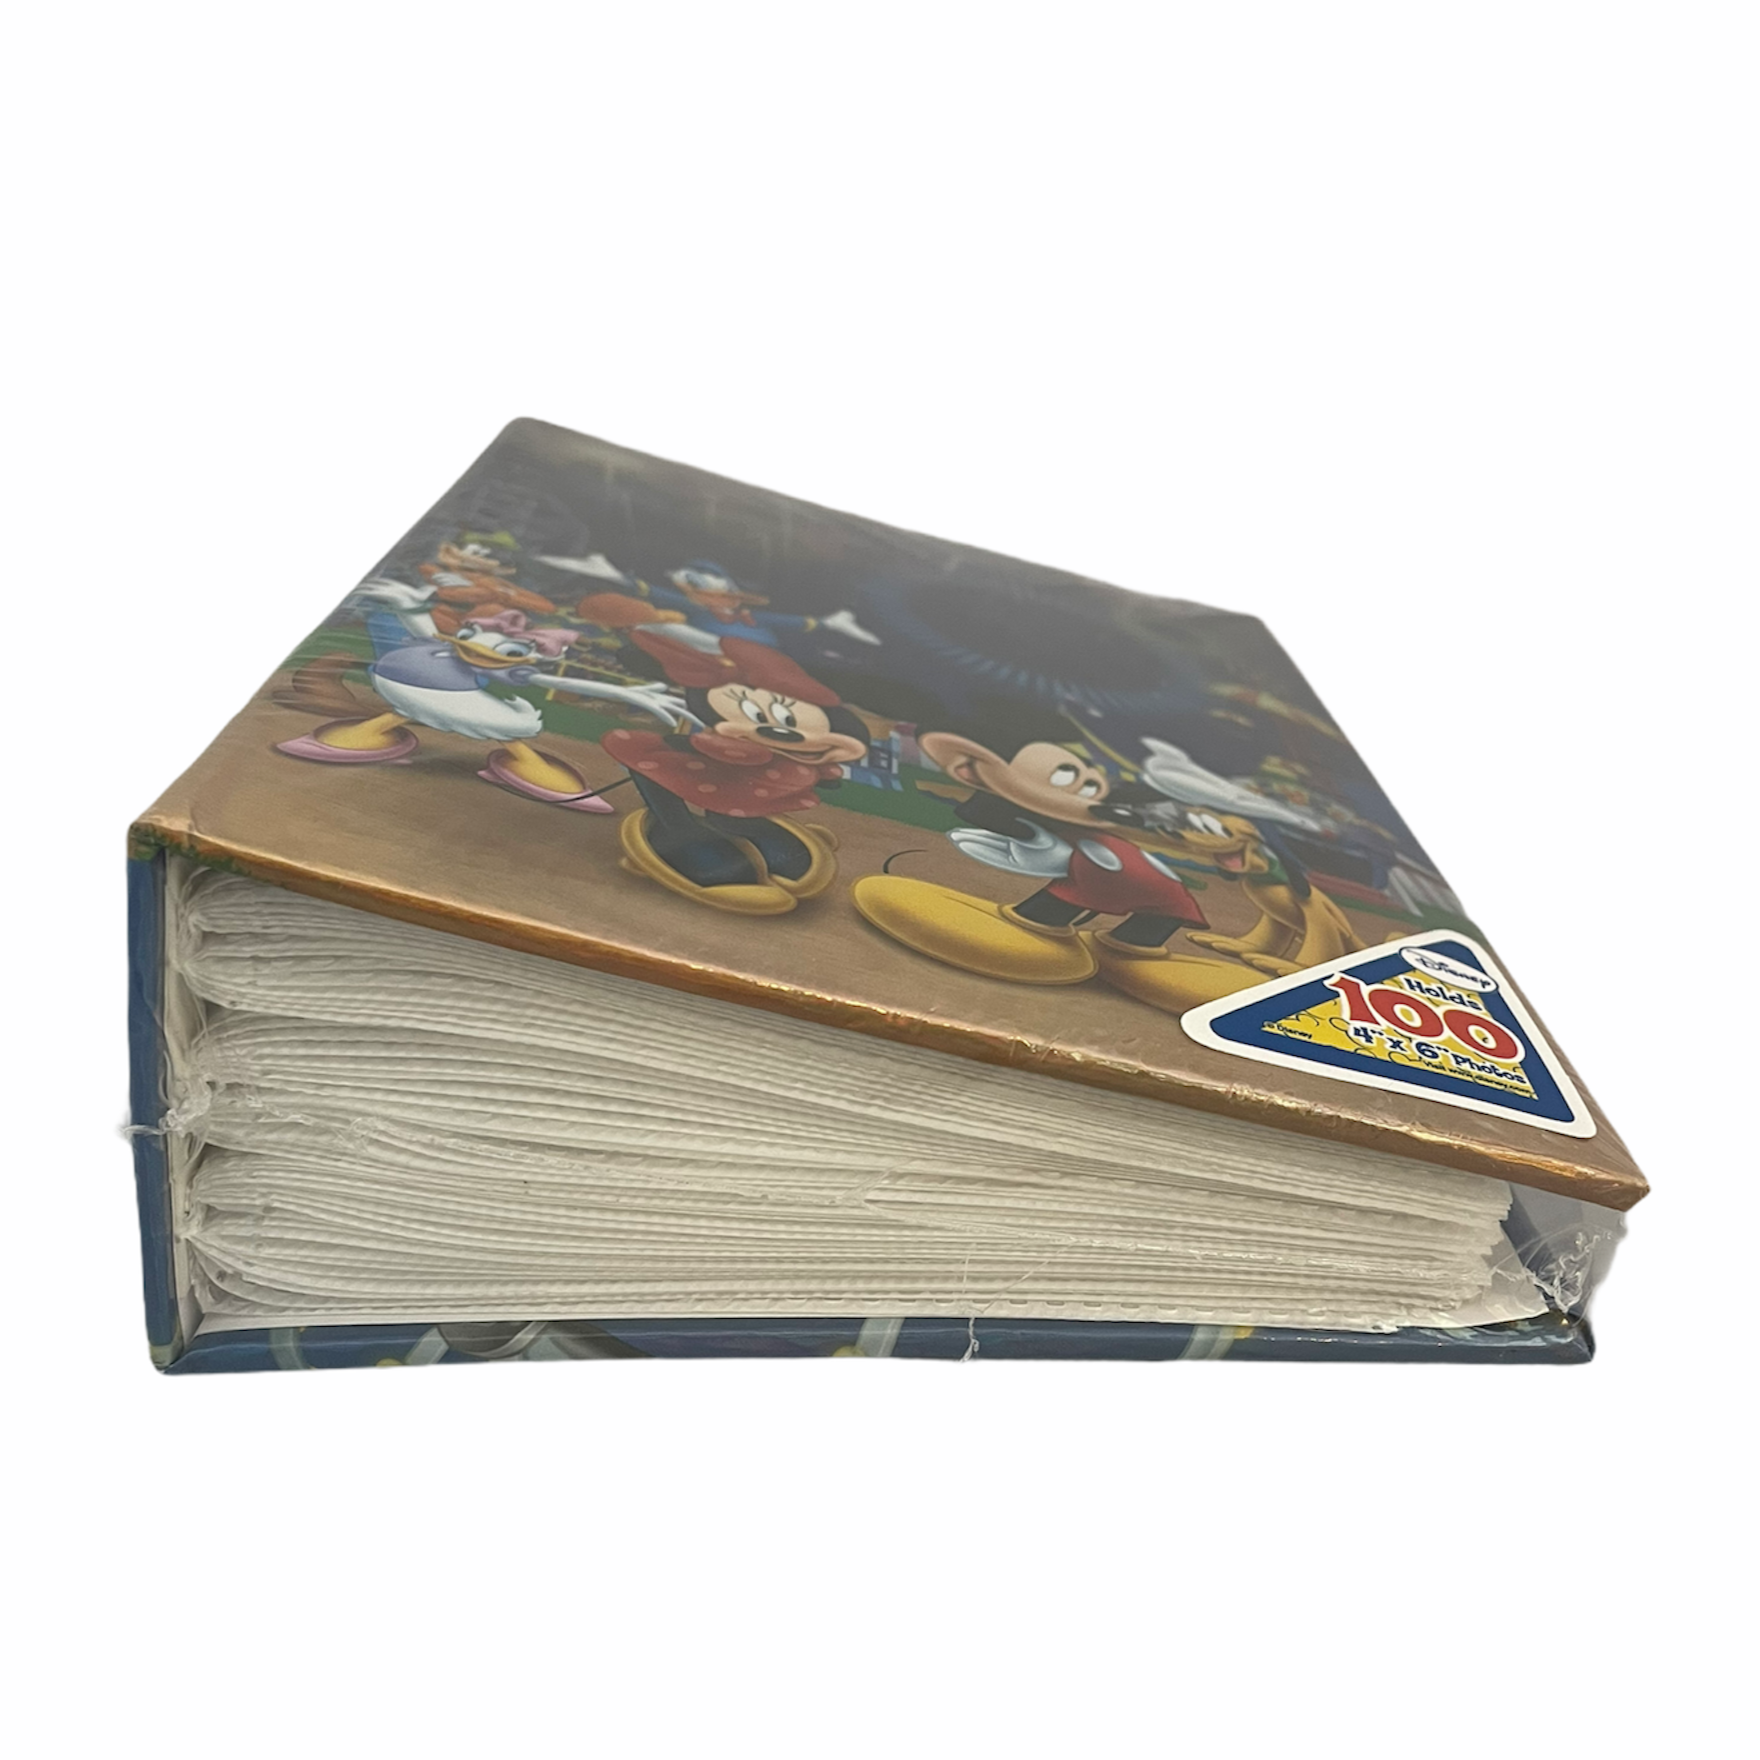 Disney Mickey Mouse Gang Crew Photo Album 100 Pictures 4 x 6